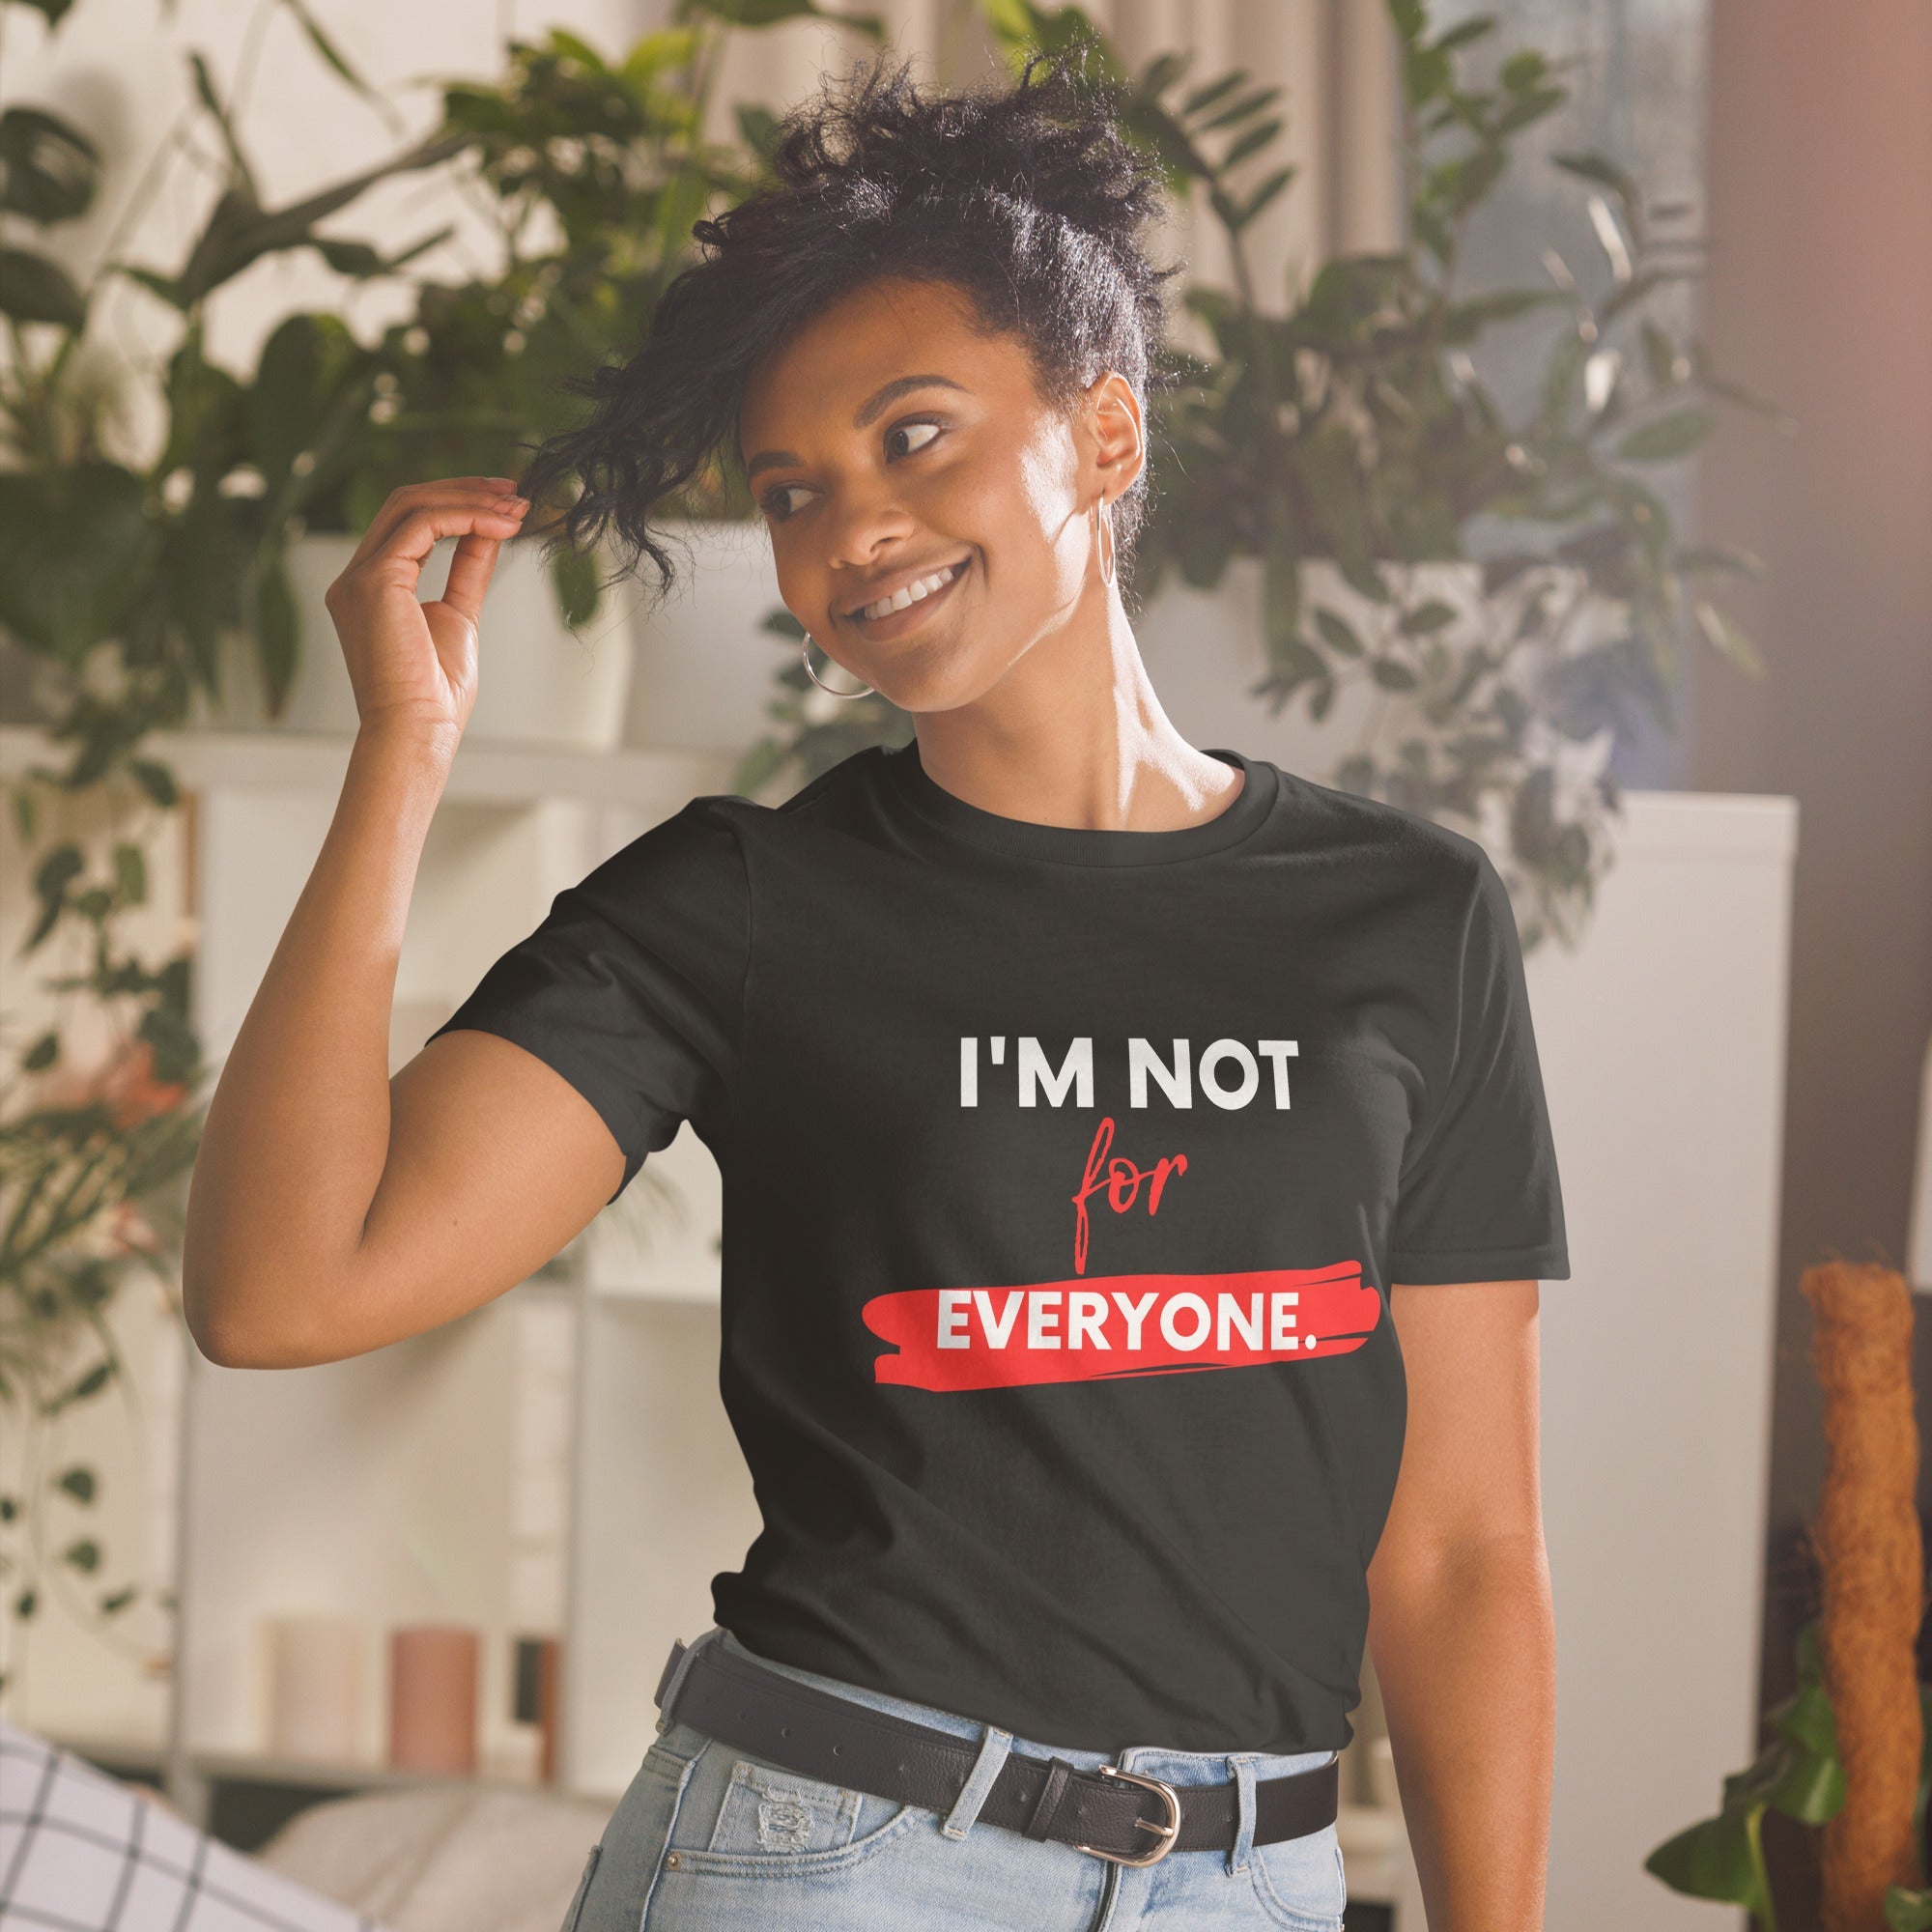 I'm Not For Everyone Short-Sleeve Unisex T-Shirt (FOR A SLIM FIT